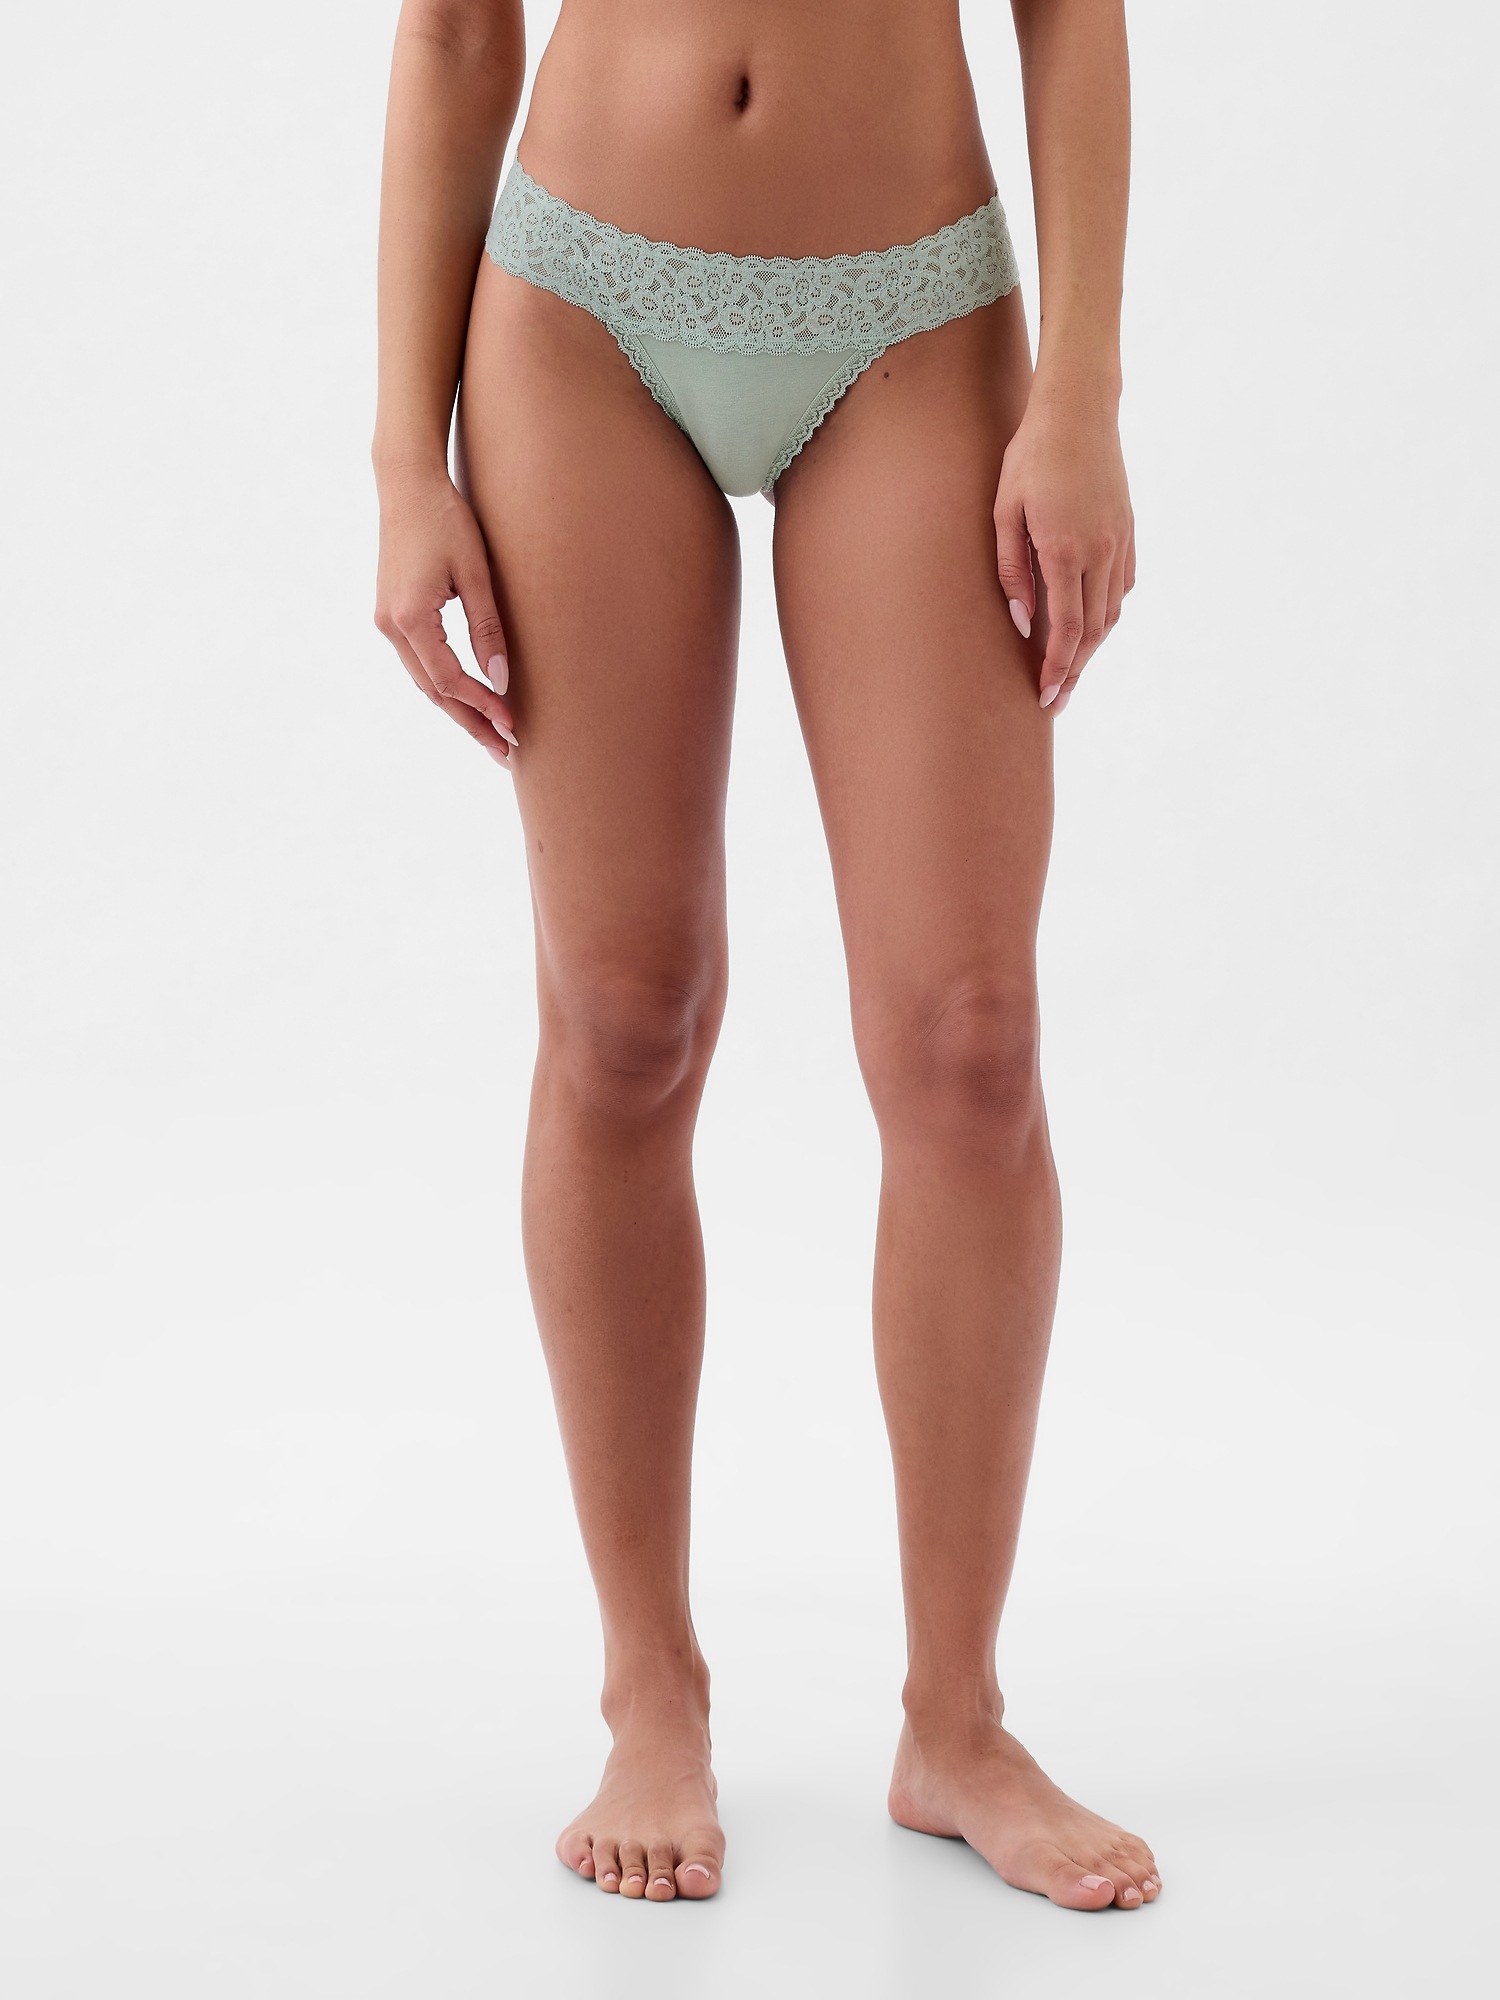  Cottonhill Underwear High Waisted Lace Panties, Sexy